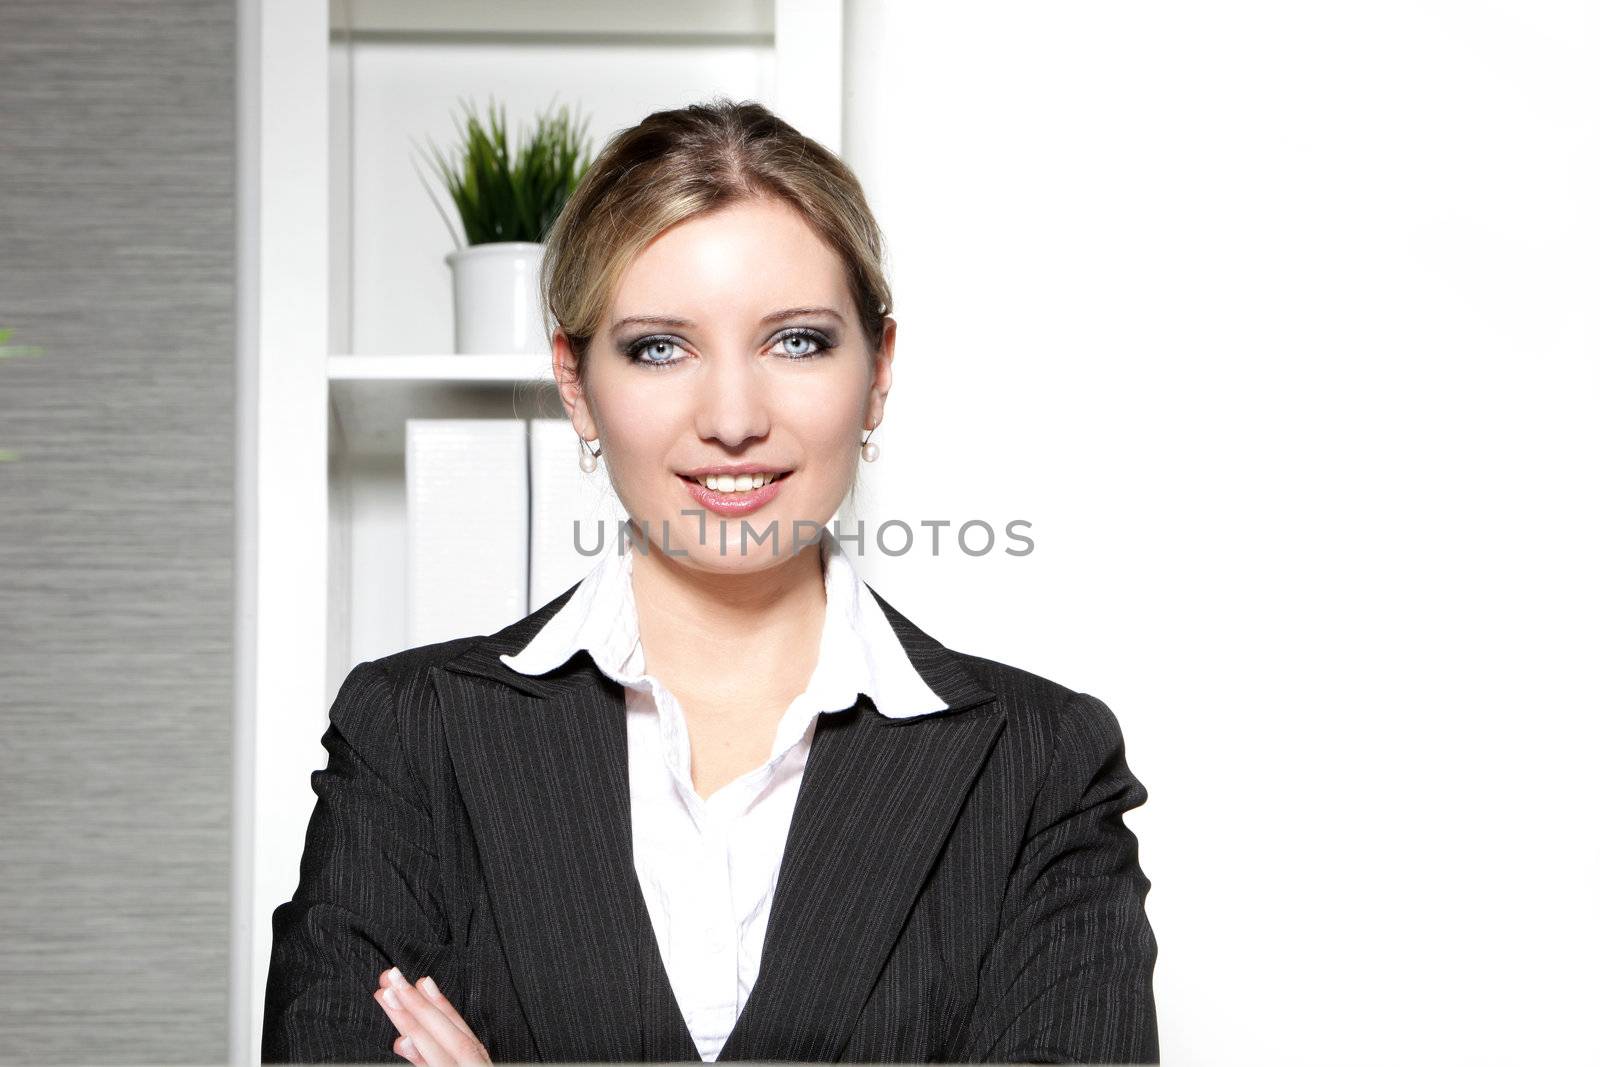 Smiling confident professional woman standing in her office looking at the camera with her arms folded